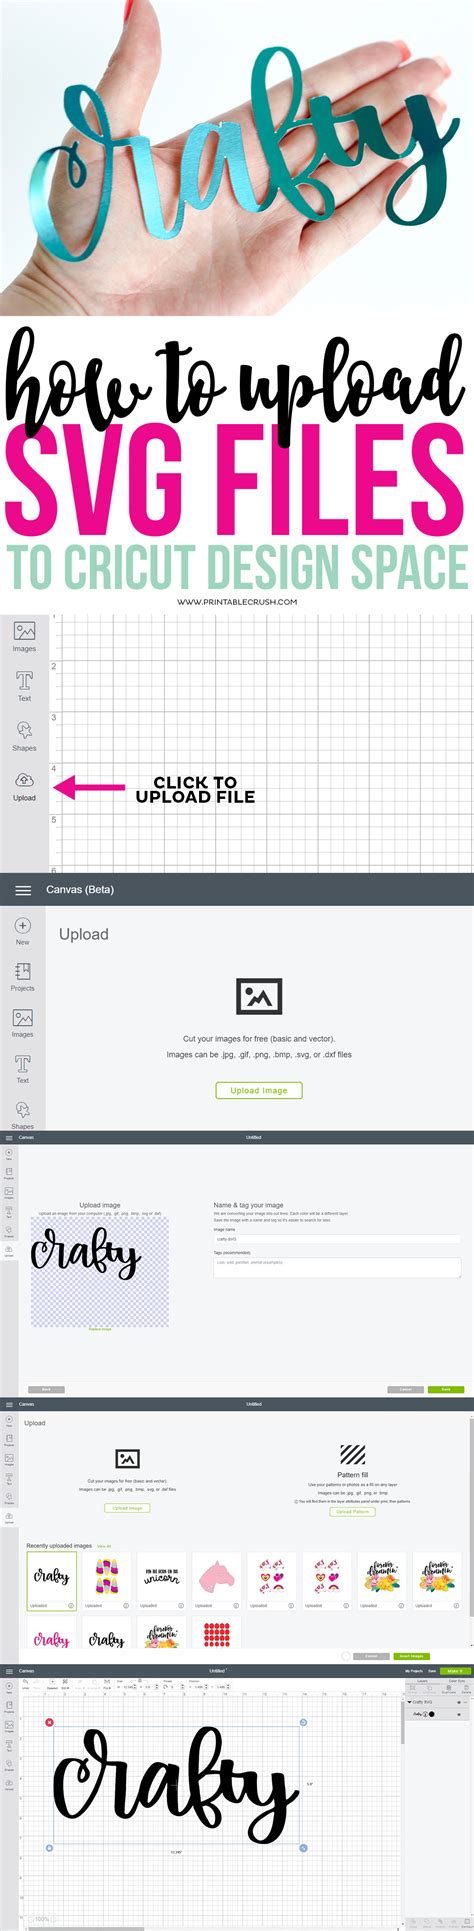 How To Upload SVG Files To Cricut Design Space Printable Crush